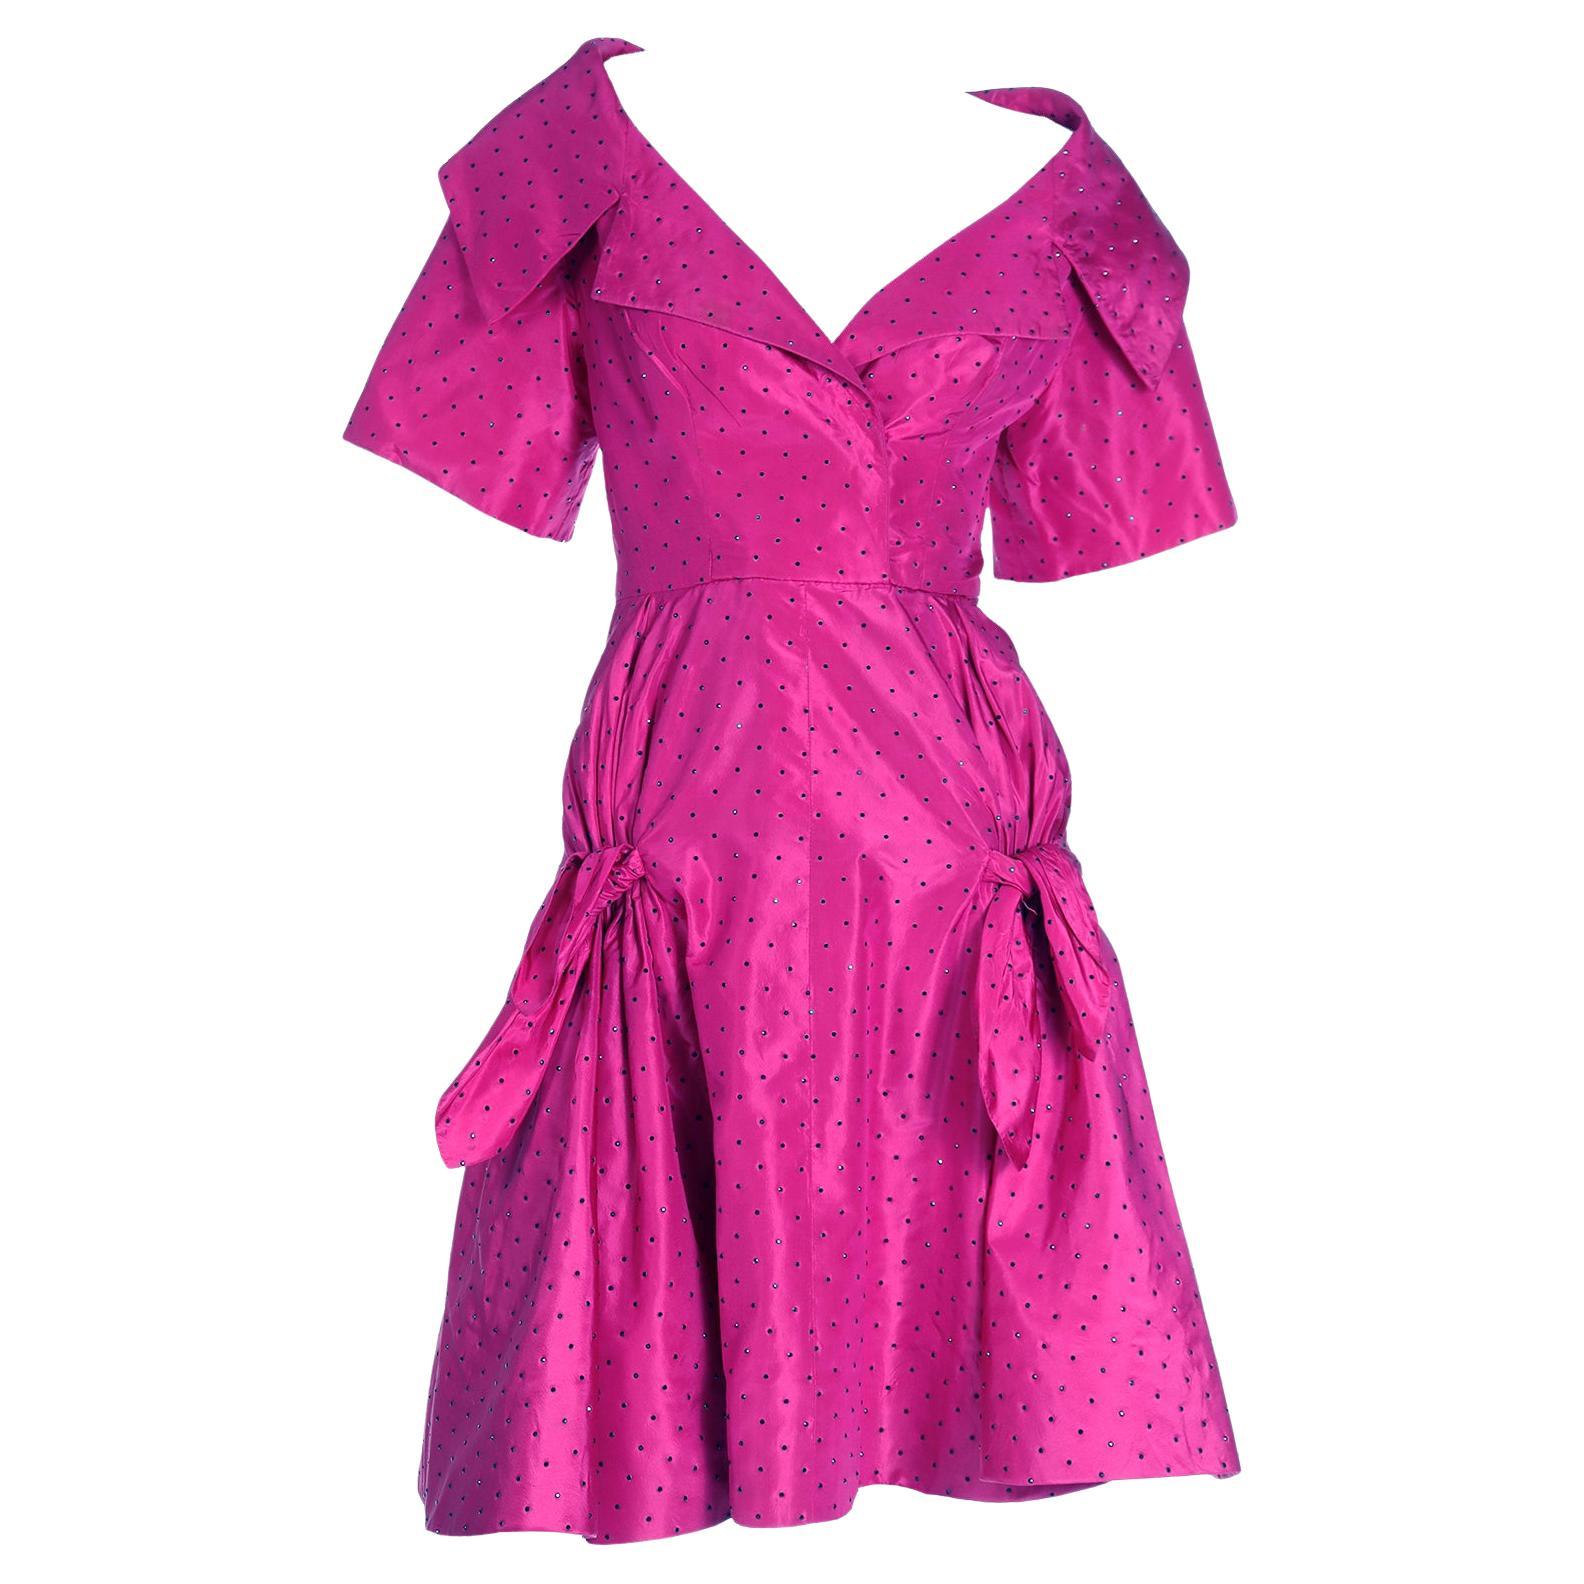 Christian Dior Couture 1987 Magenta Evening Dress w Crystals by Marc Bohan For Sale